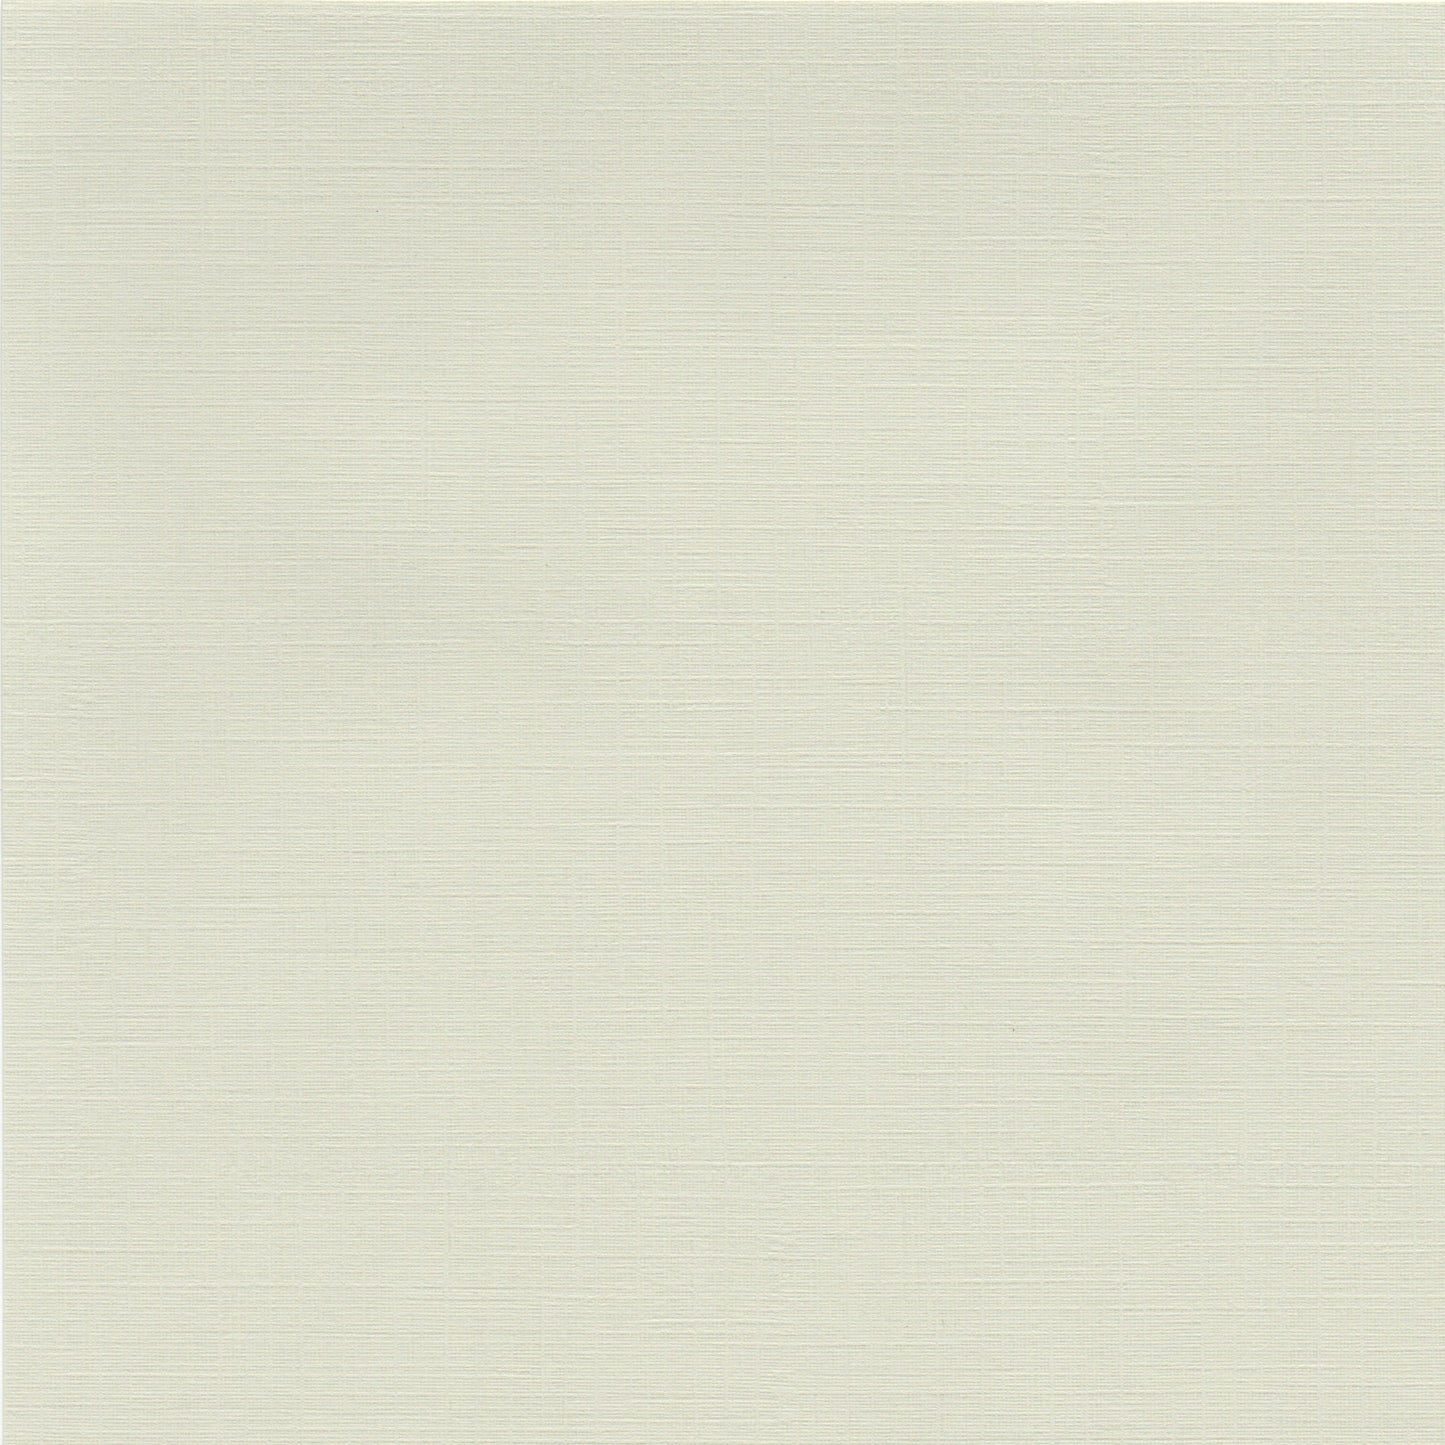 Pack of 20 Sheets 14x14cm Textured Linen Paper - Milky White - washi paper - Lavender Home London